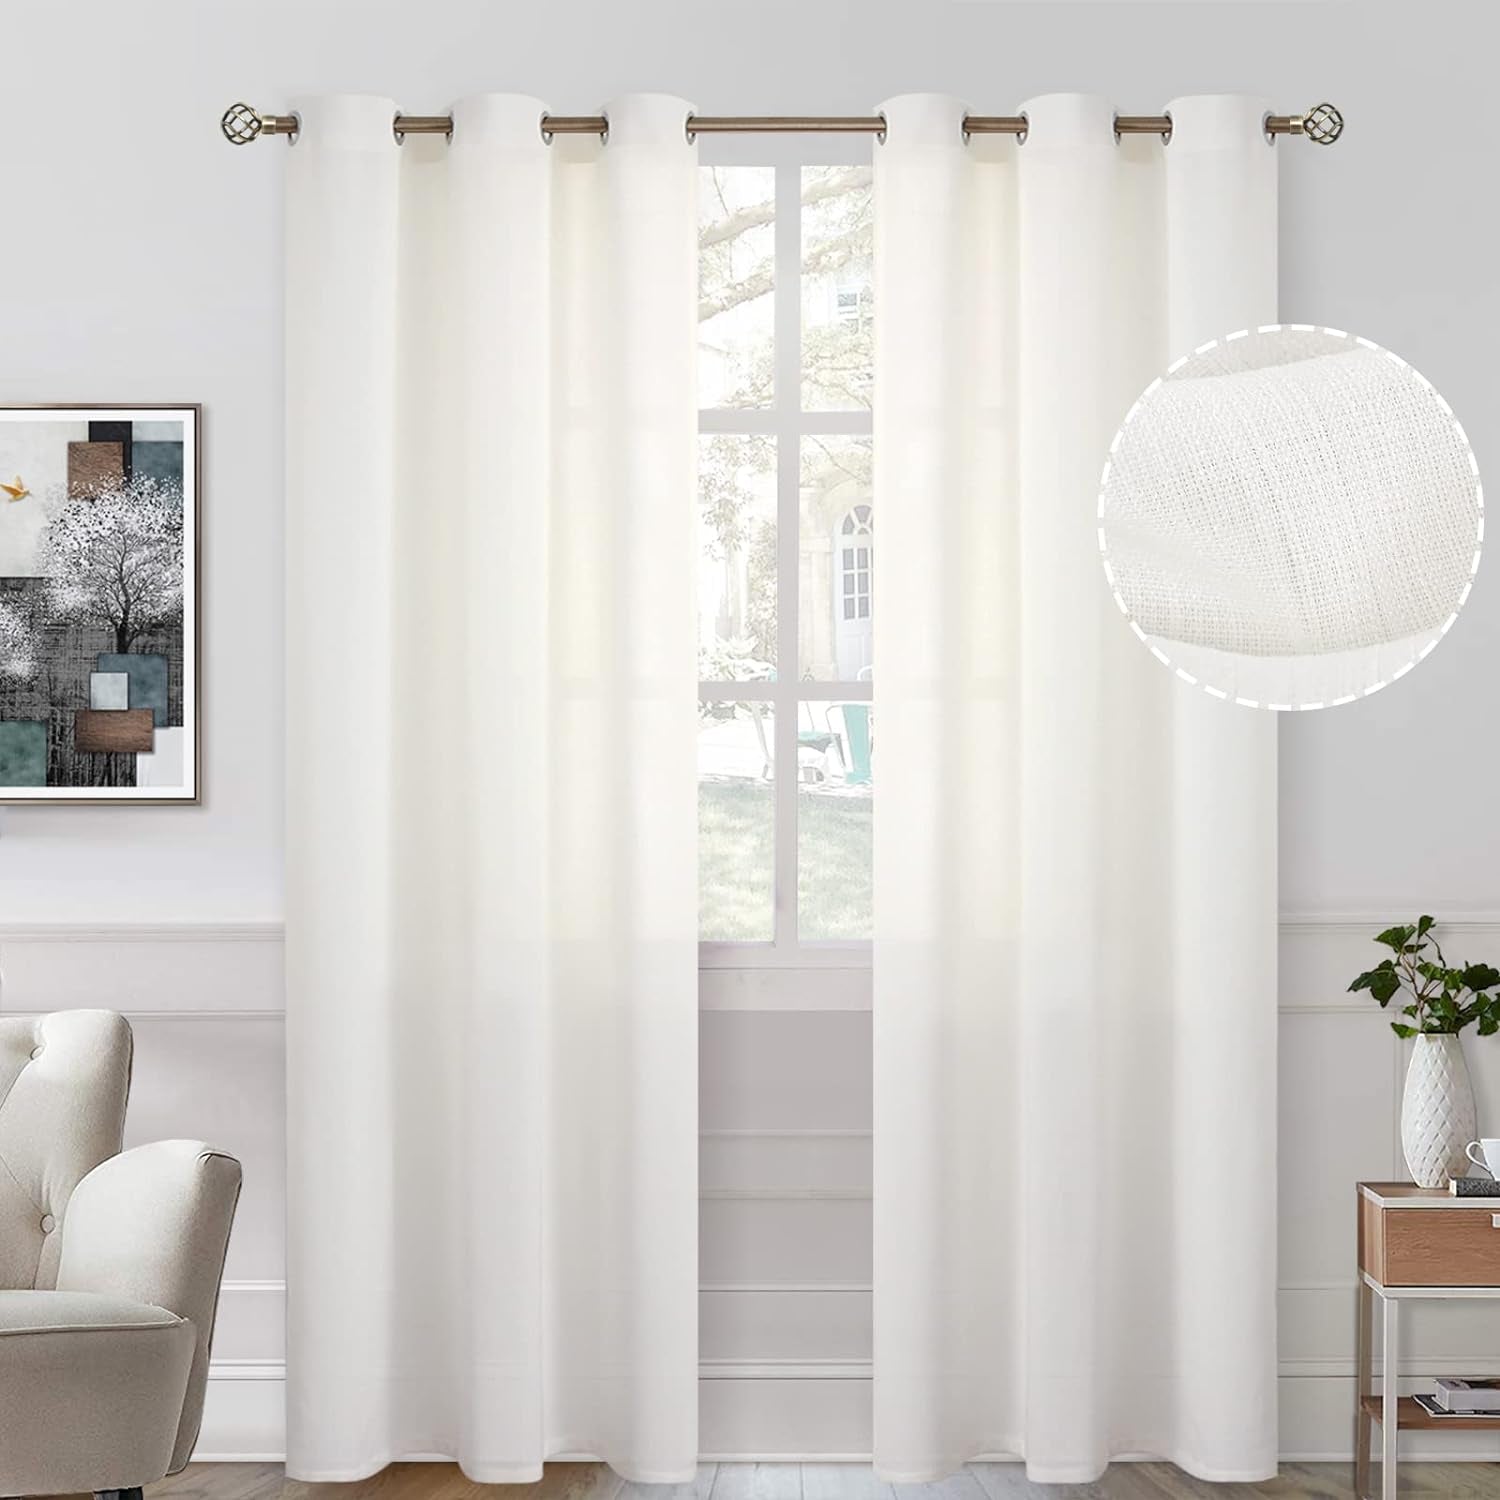 Bgment Natural Linen Look Semi Sheer Curtains for Bedroom, 52 X 54 Inch White Grommet Light Filtering Casual Textured Privacy Curtains for Bay Window, 2 Panels  BGment Ivory Cream 42W X 95L 